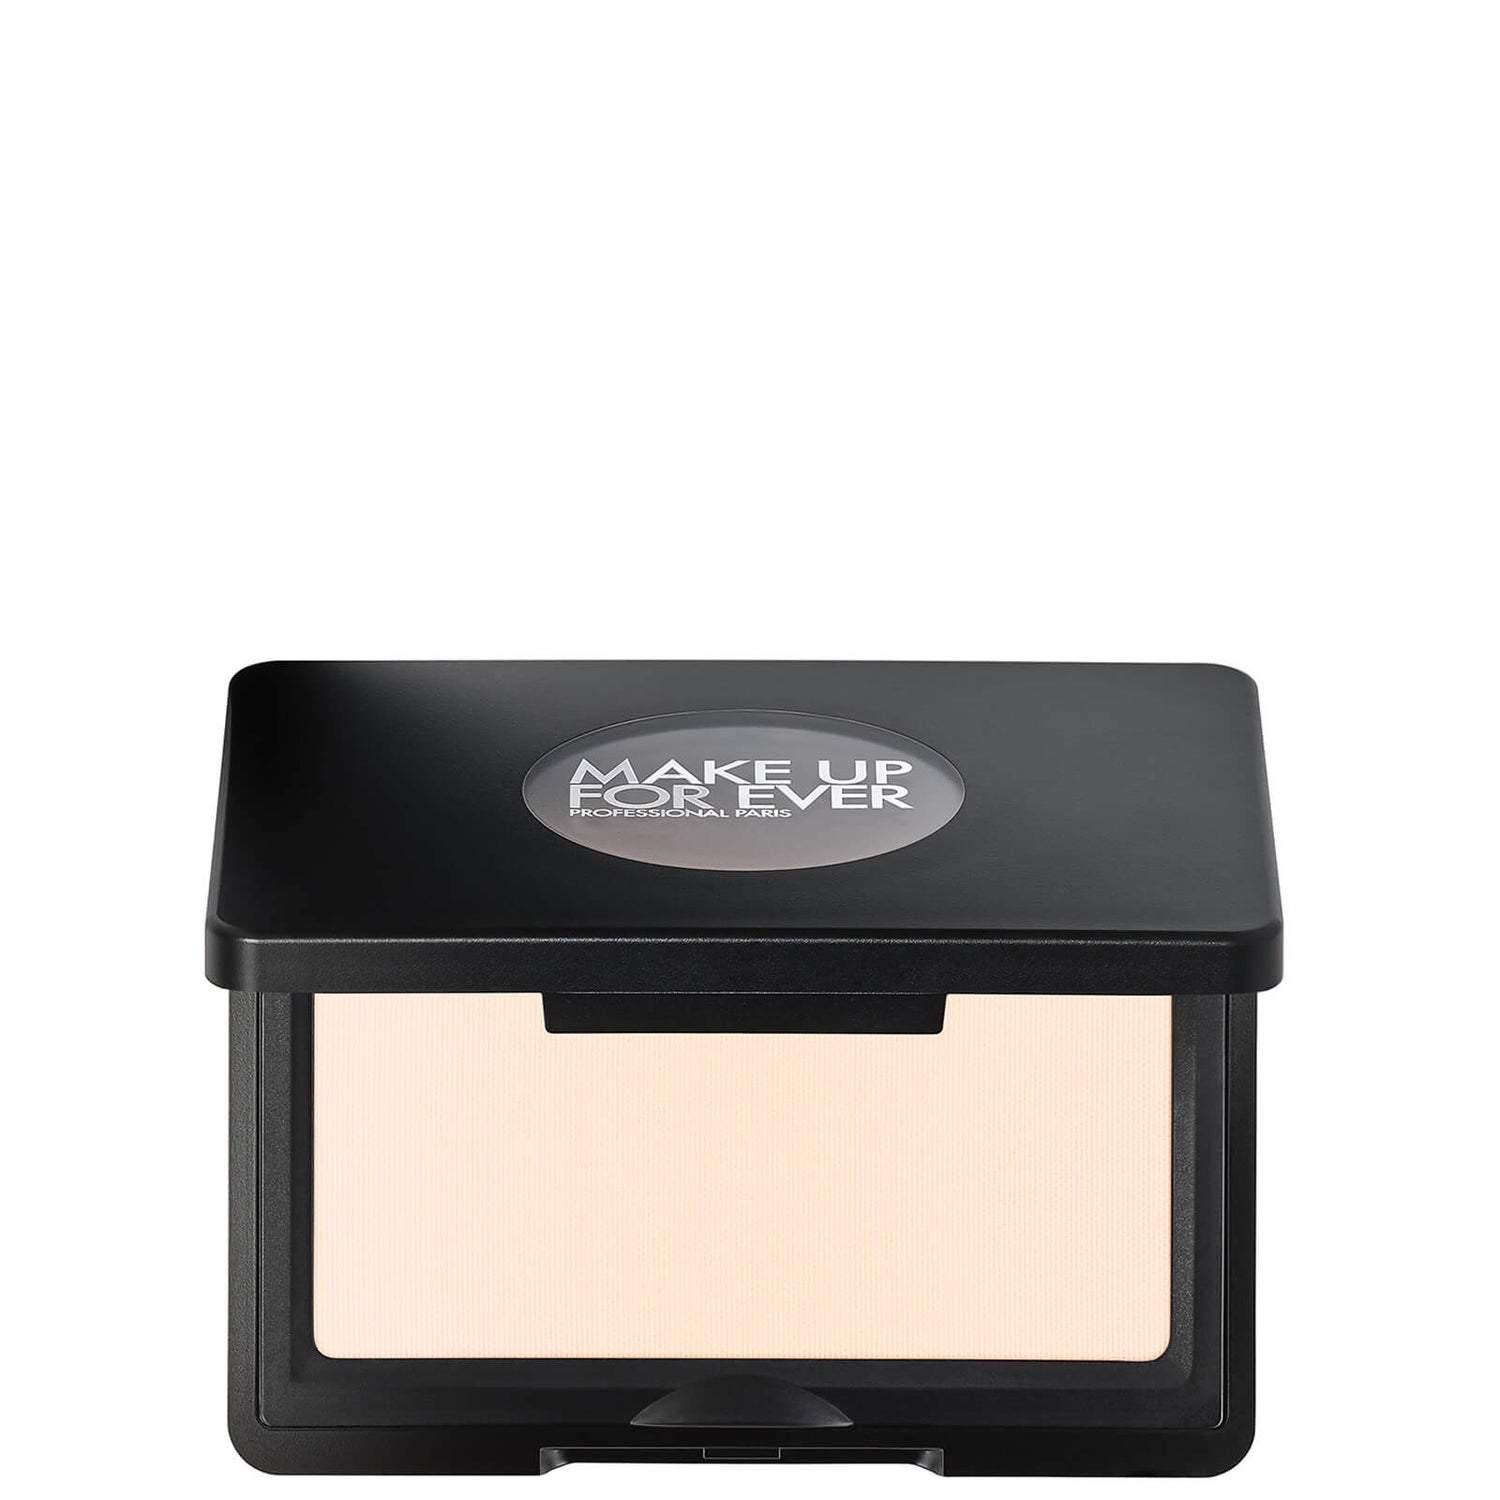 MAKE UP FOR EVER Artist Face Powders Highlighter 4g (Various Shades)